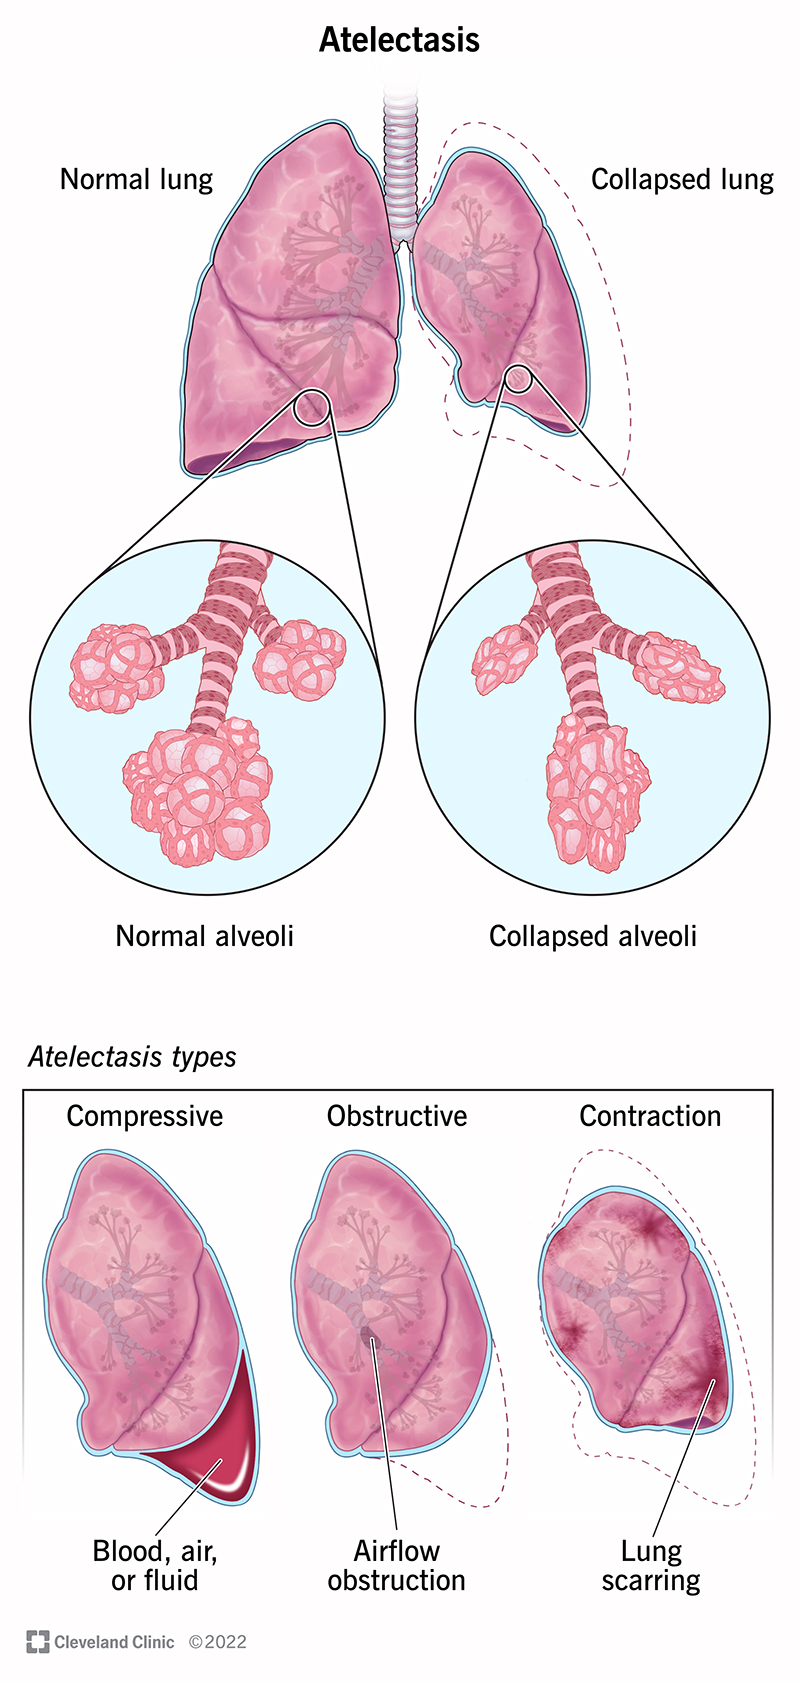 Illustration of fully inflated lung and lung affected by atelectasis. Atelectasis makes alveoli appear deflated.